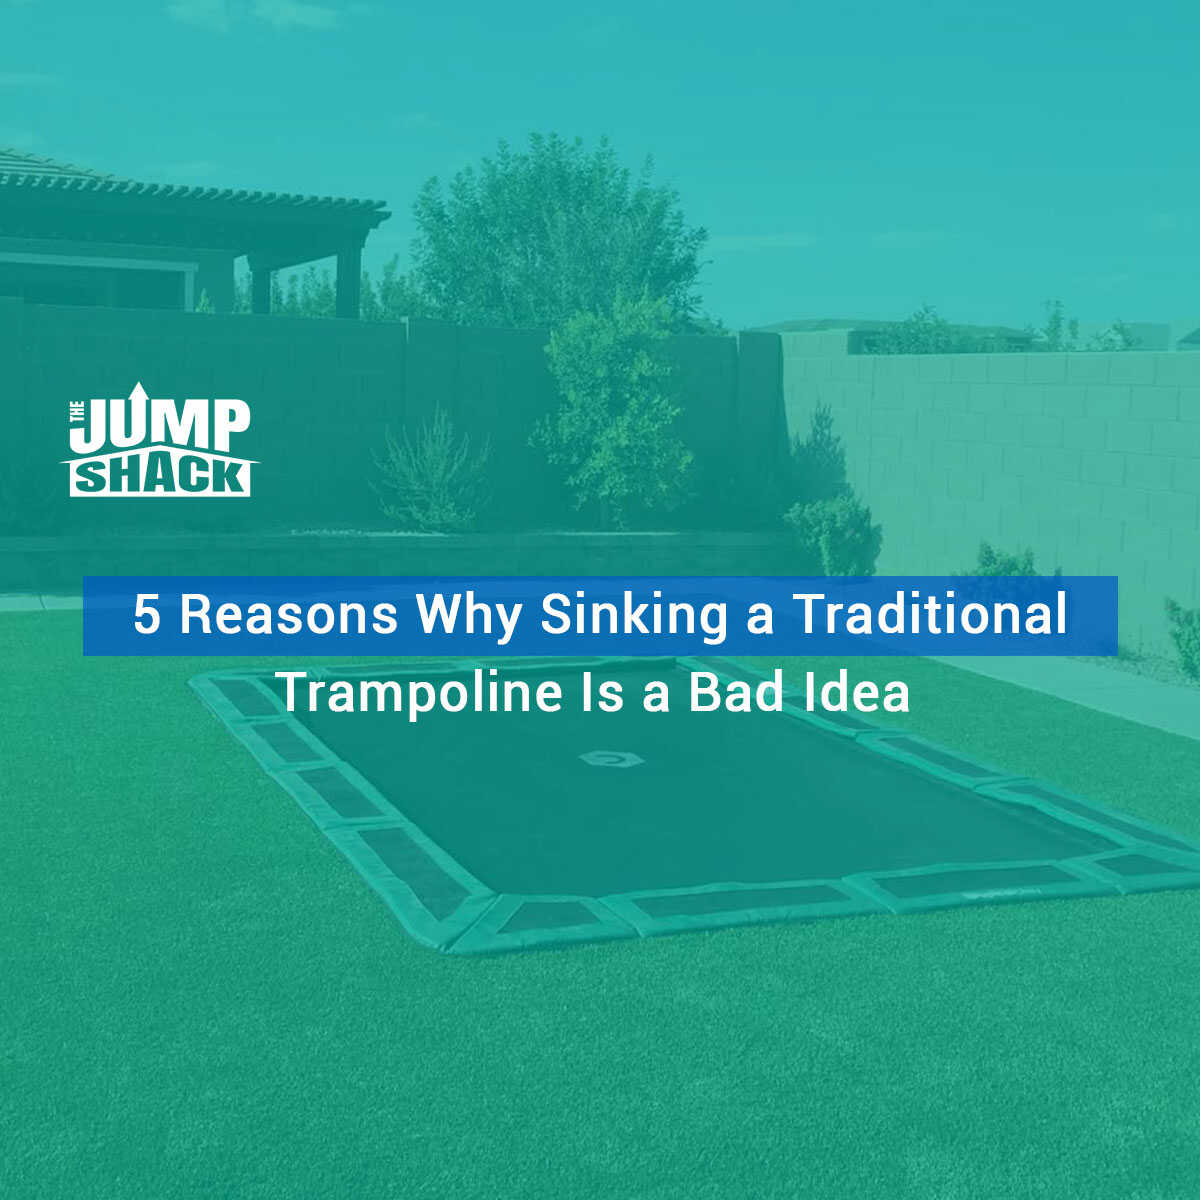 5 Reasons Why Sinking a Traditional Trampoline Is a Bad Idea